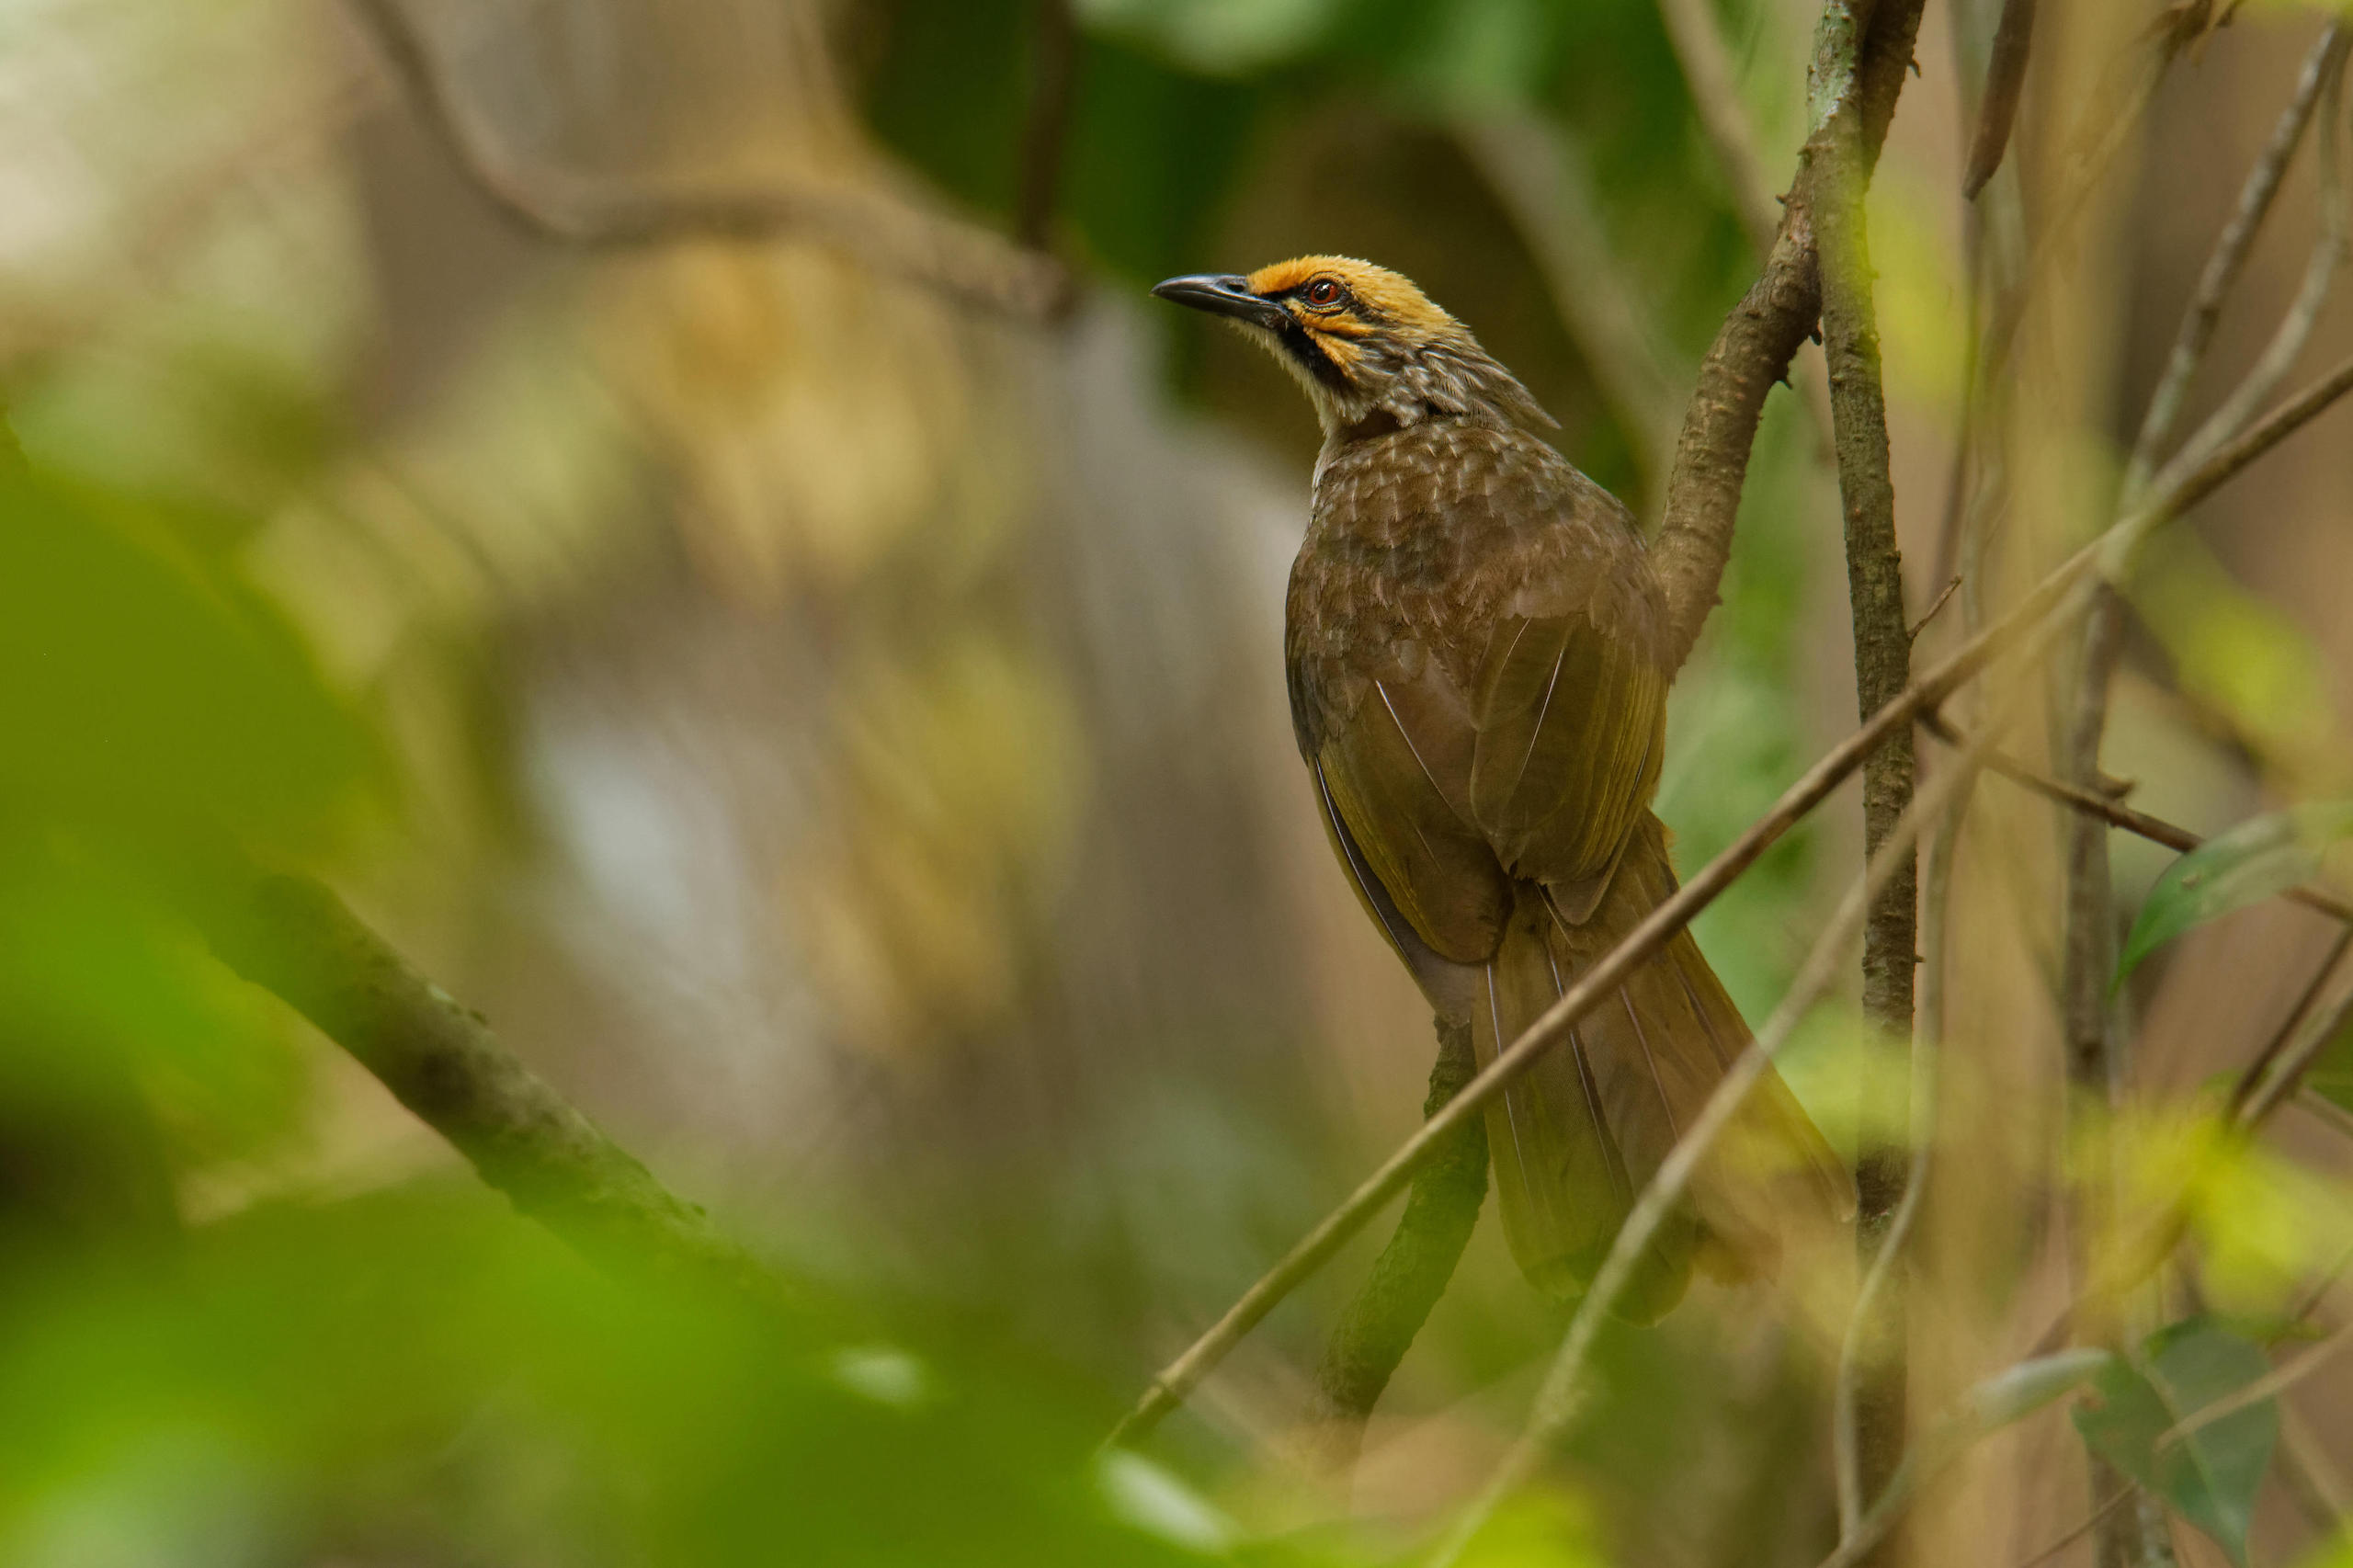 The straw-headed bulbul is close to extinction in Indonesia